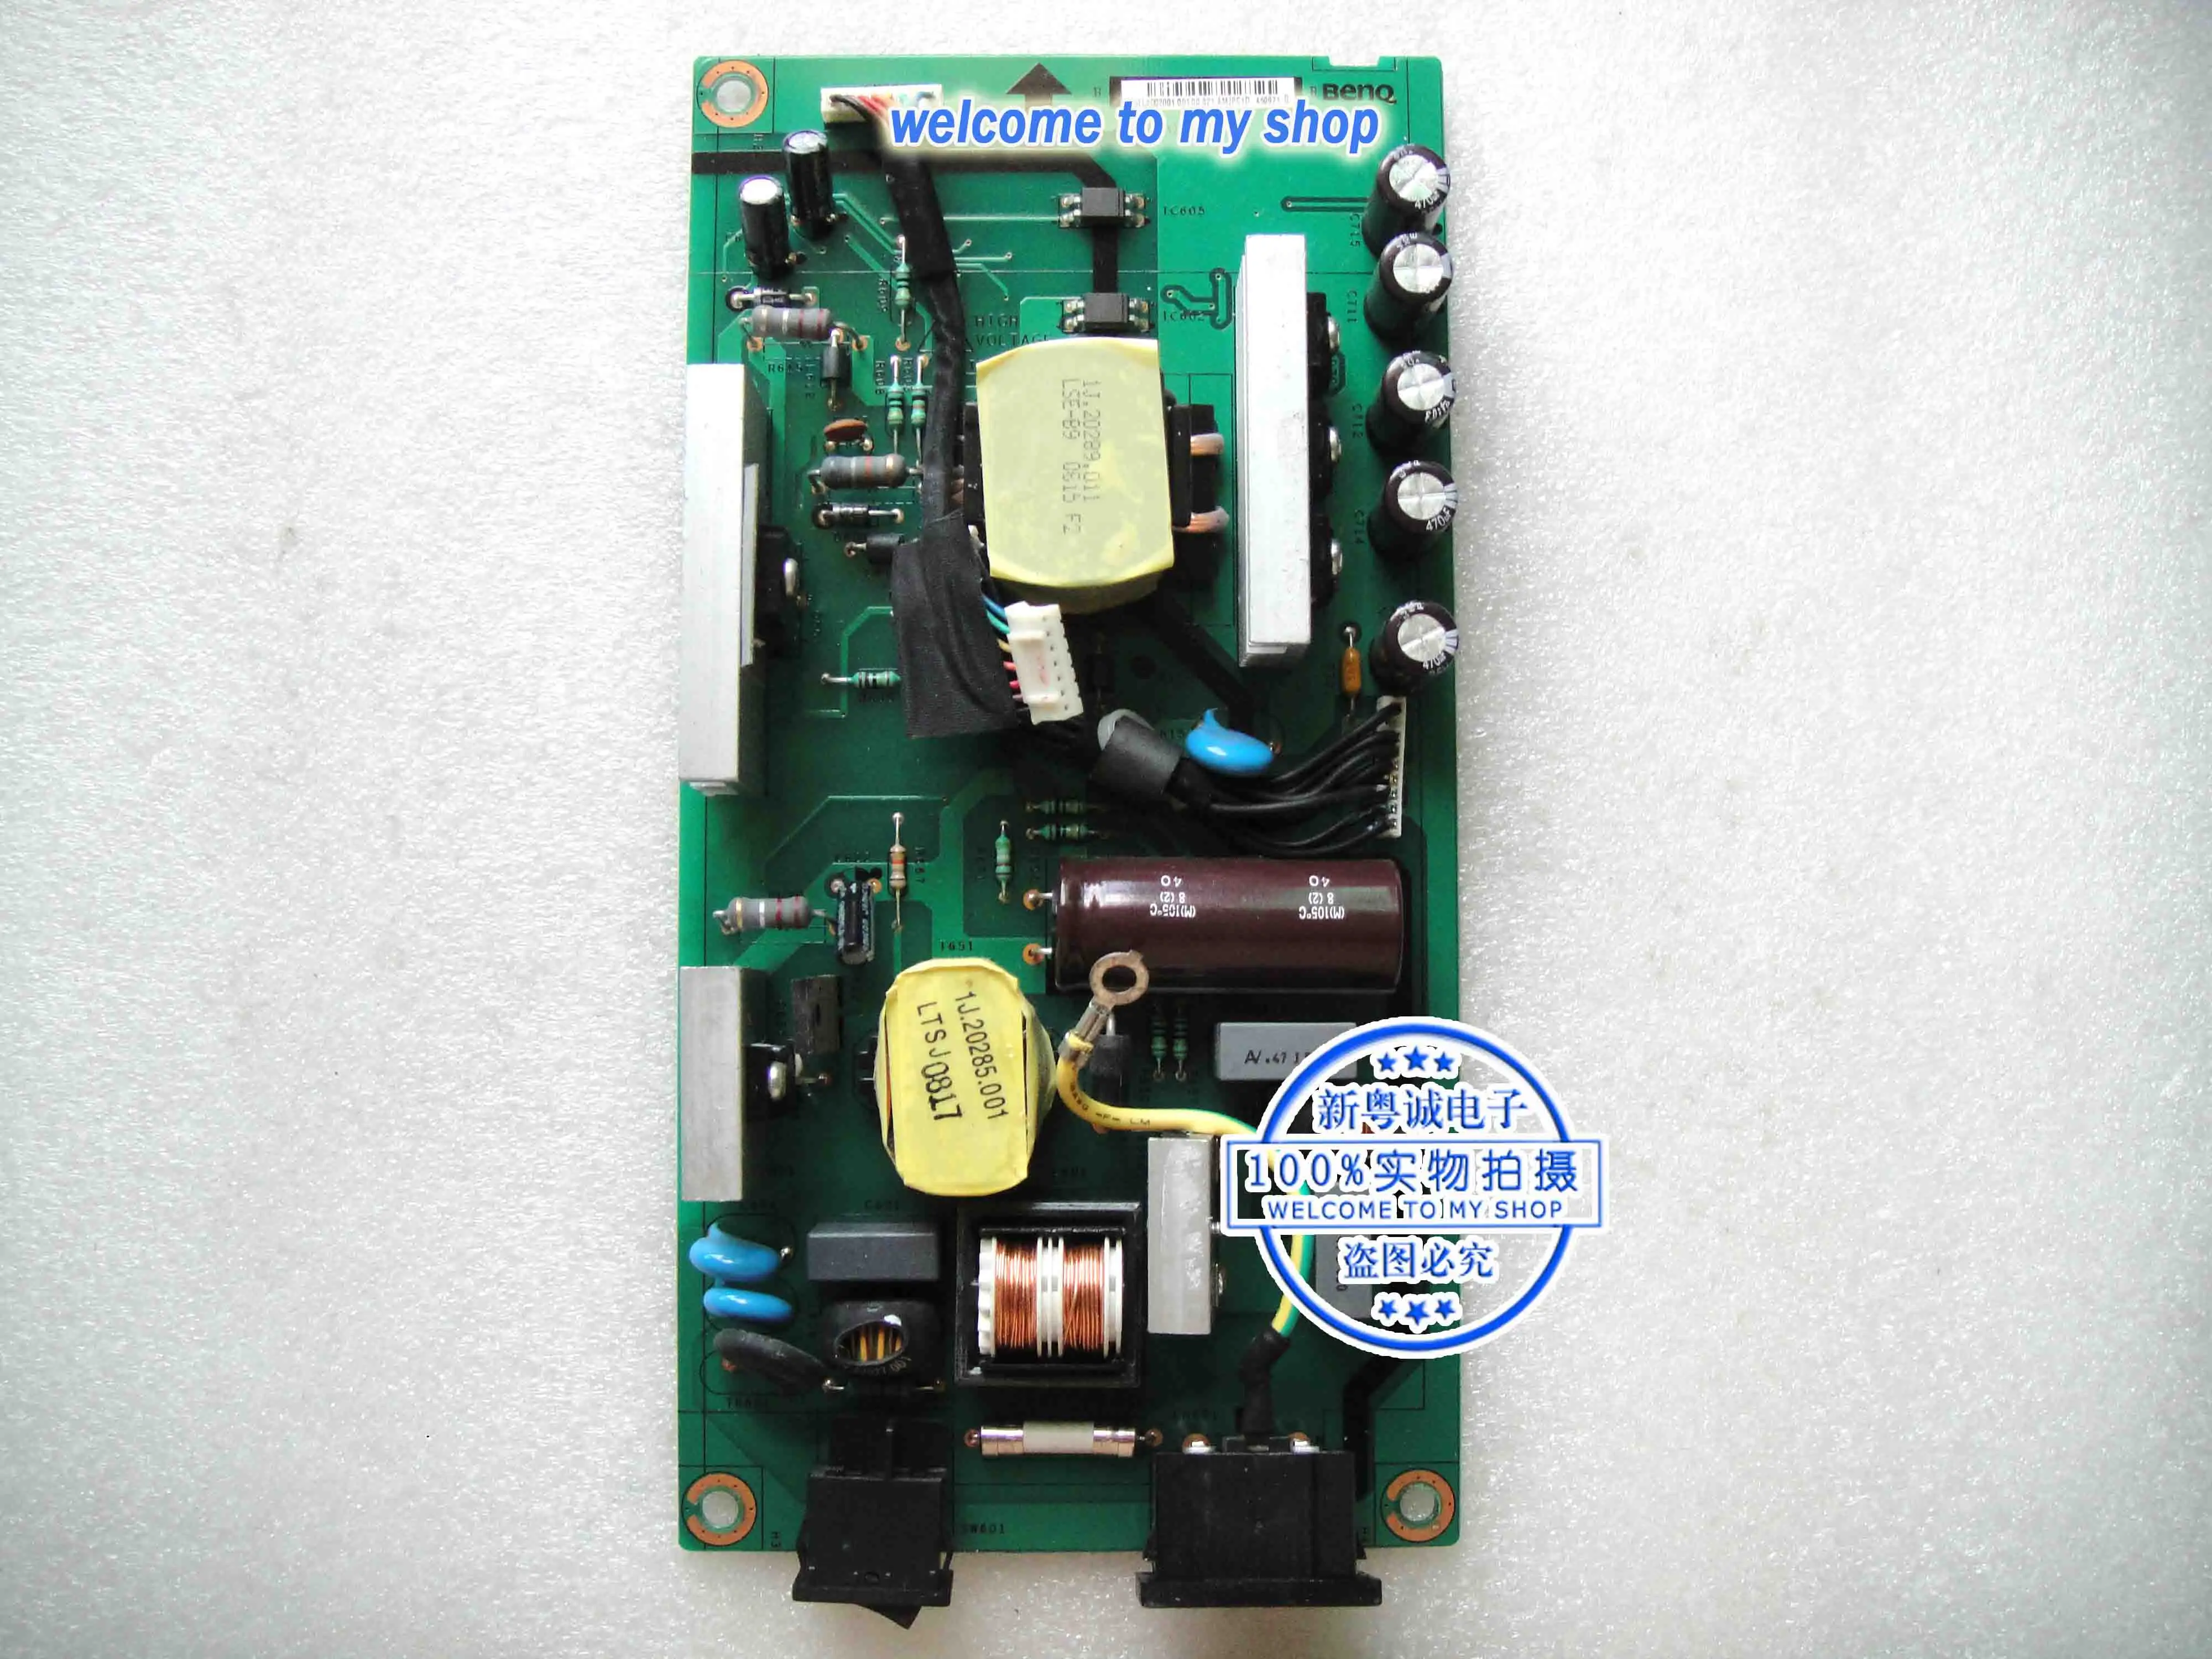 

HSTND-2111-B power supply board with the screen LTM240M2-L02